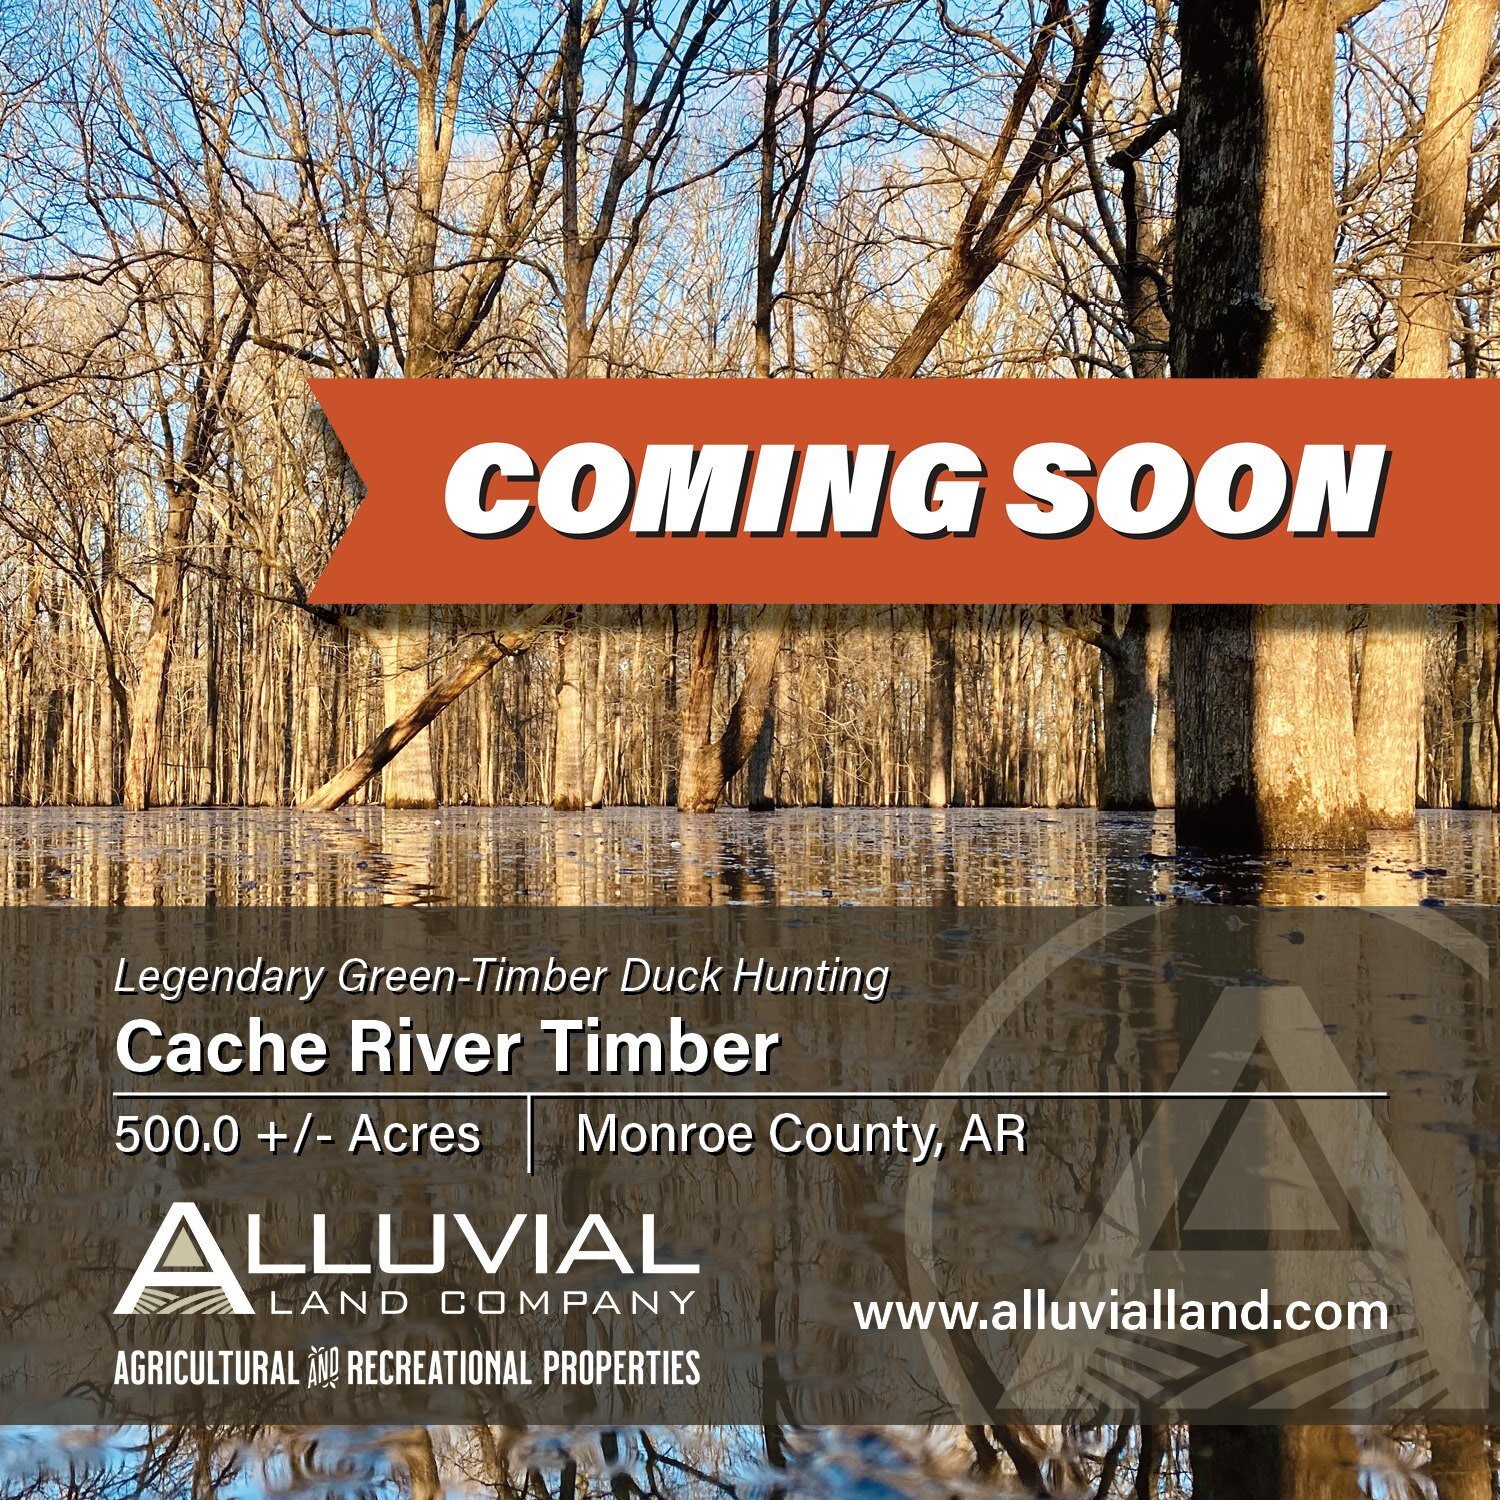 COMING SOON - Cache River Timber
500.0 +/- impounded acres, offering legendary green-timber duck hunting. Located in Monroe County, Arkansas near the confluences of the White River, Cache River, and Bayou DeView. Contact us to learn more.

JOEL WHICK